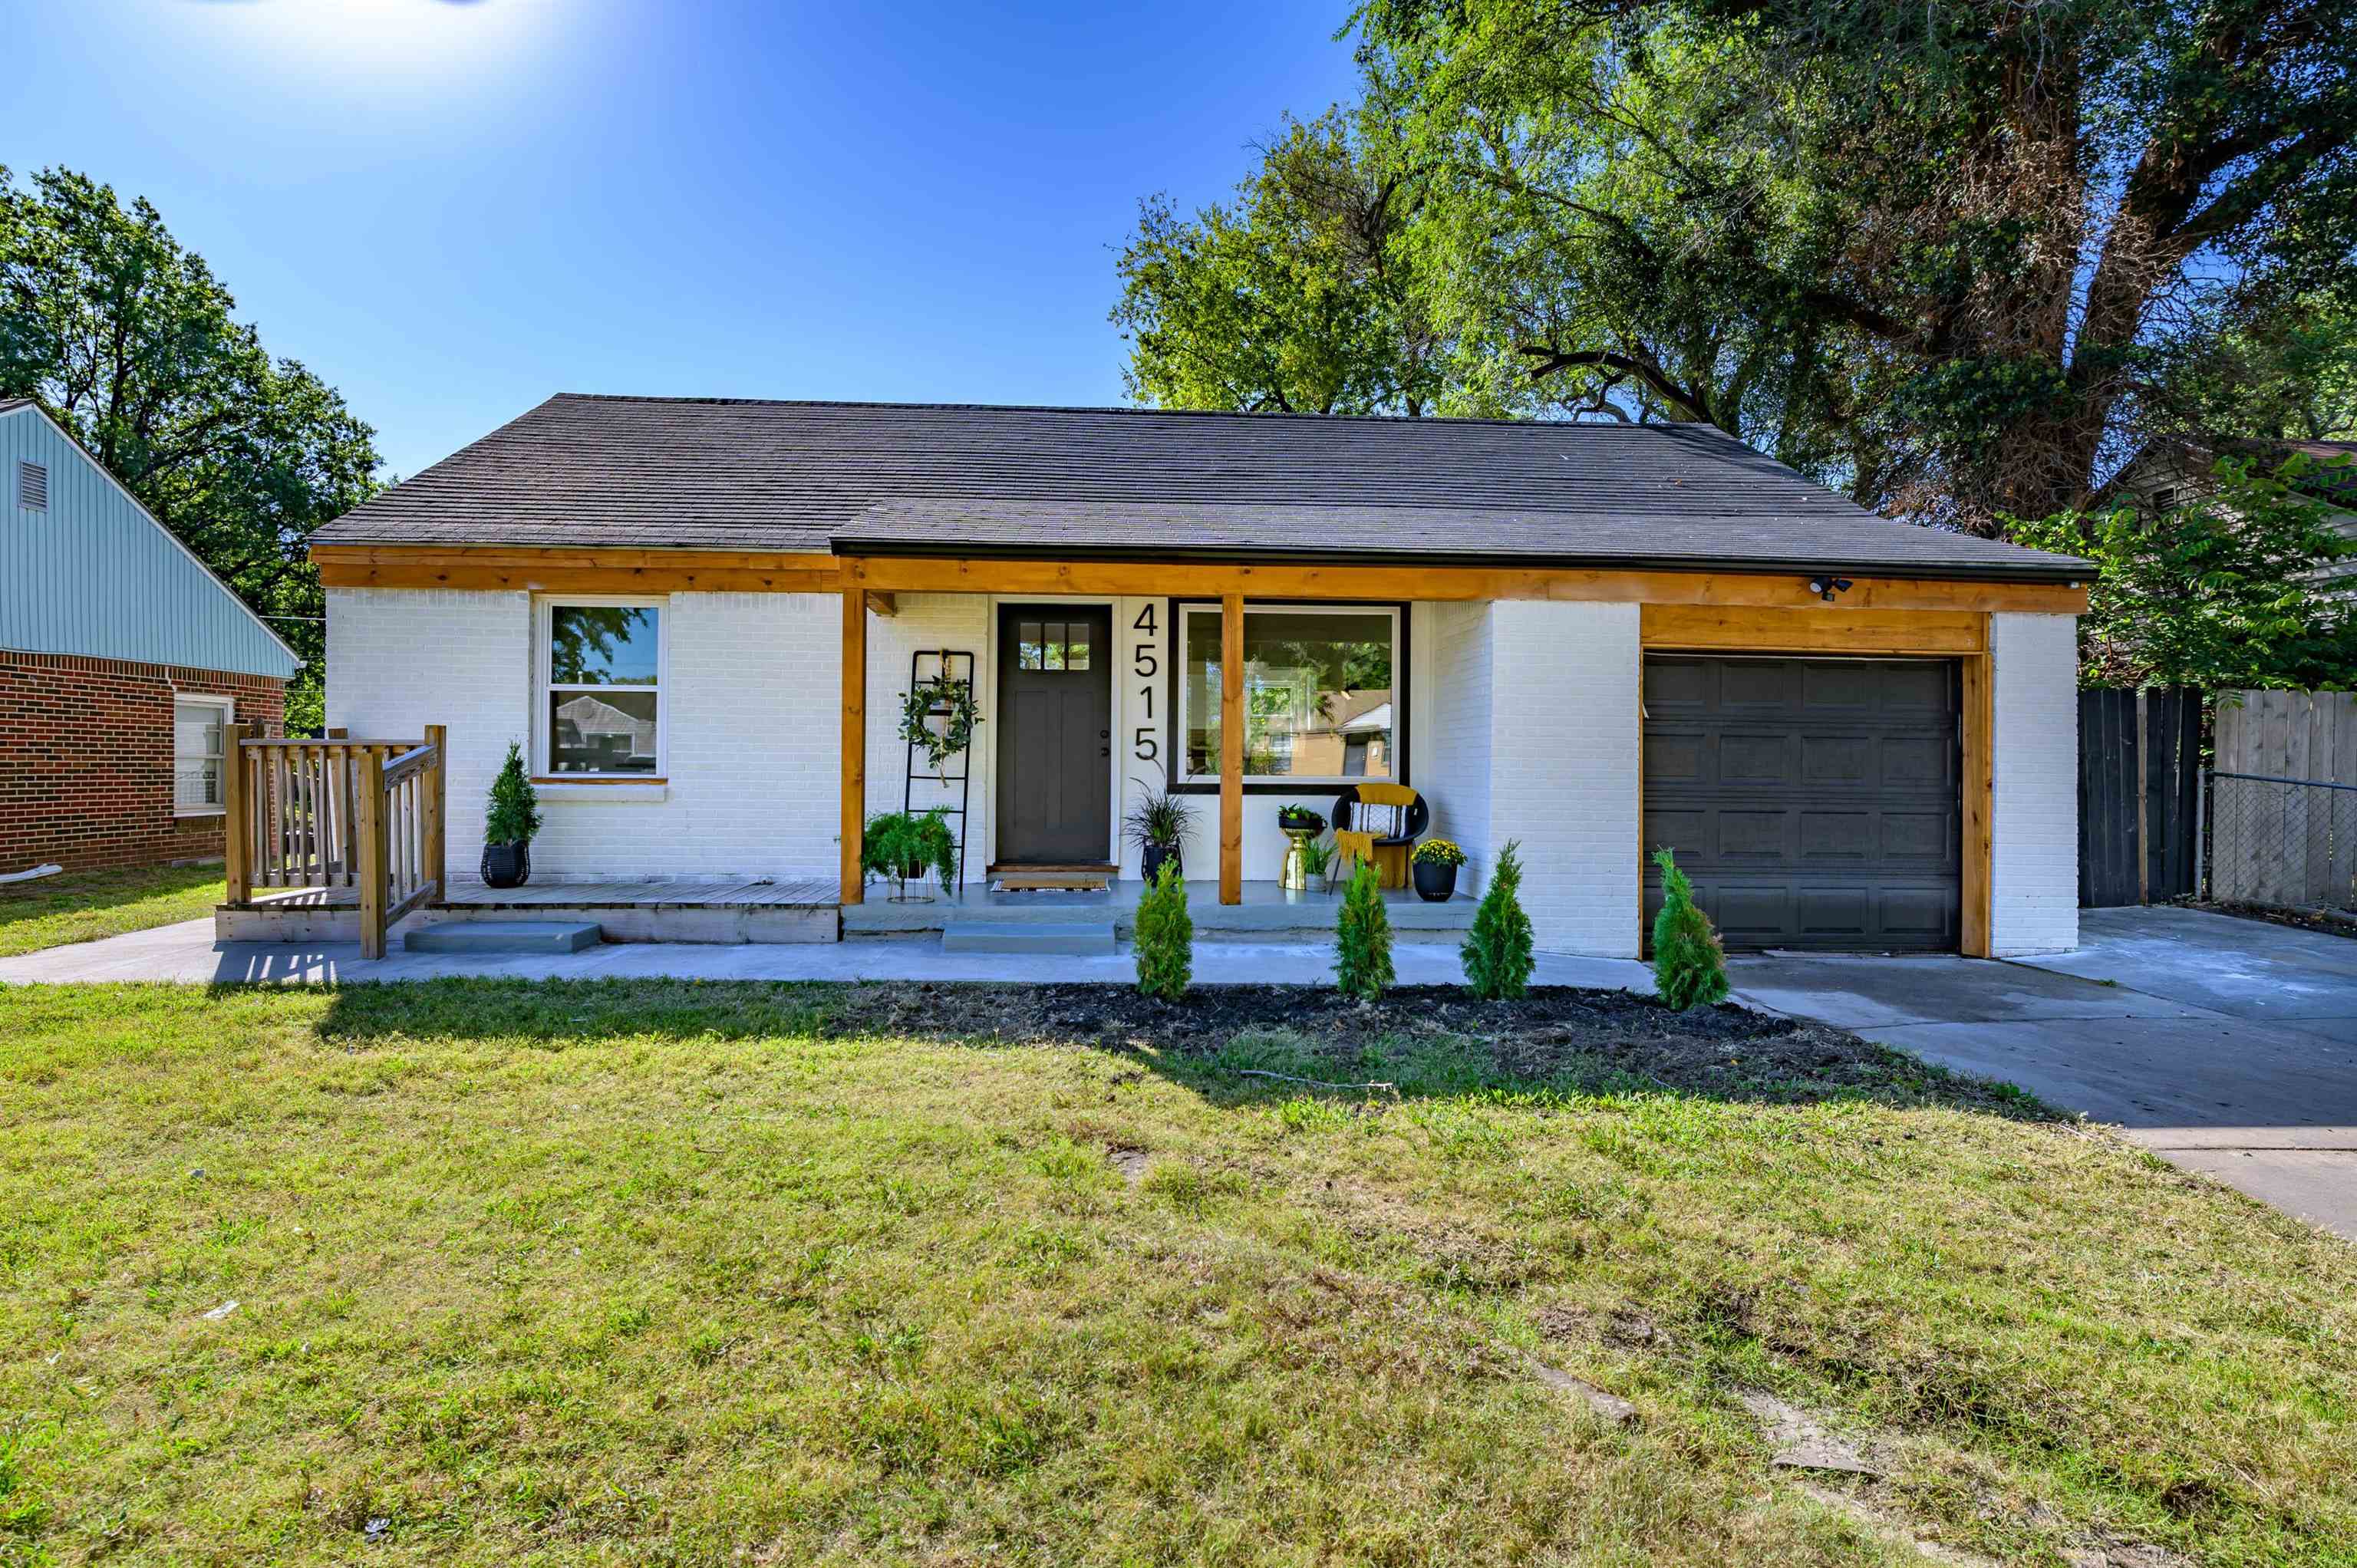 Talk about the unexpected! This two bedroom, two bath junior ranch home could pass as a brand new bu